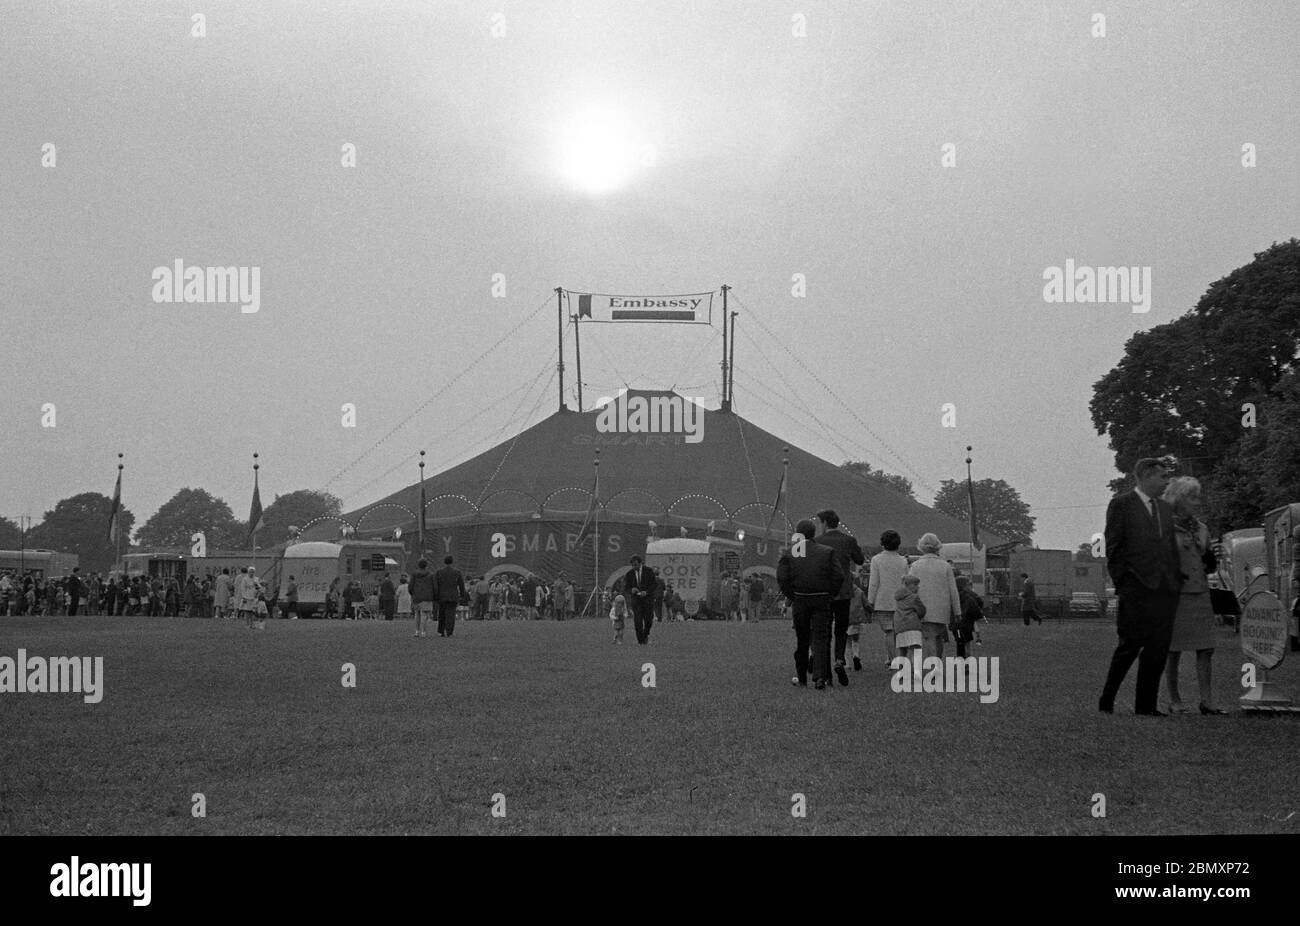 Billy Smart’s Circus sets up on The Downs in Bristol in May 1969.  It was one of the largest travelling circuses in Europe and older Bristol residents remembered the days the circus train would arrived at nearby Clifton Downs station, with animals and performers parading up to the site.  But by the late 60s tastes were changing with increasing opposition to the use of wild animals in entertainment.  After Billy Smart died in 1966 the touring business survived for only another five years, closing in 1971.  Younger relatives revived a smaller touring version in the 1990s. Stock Photo